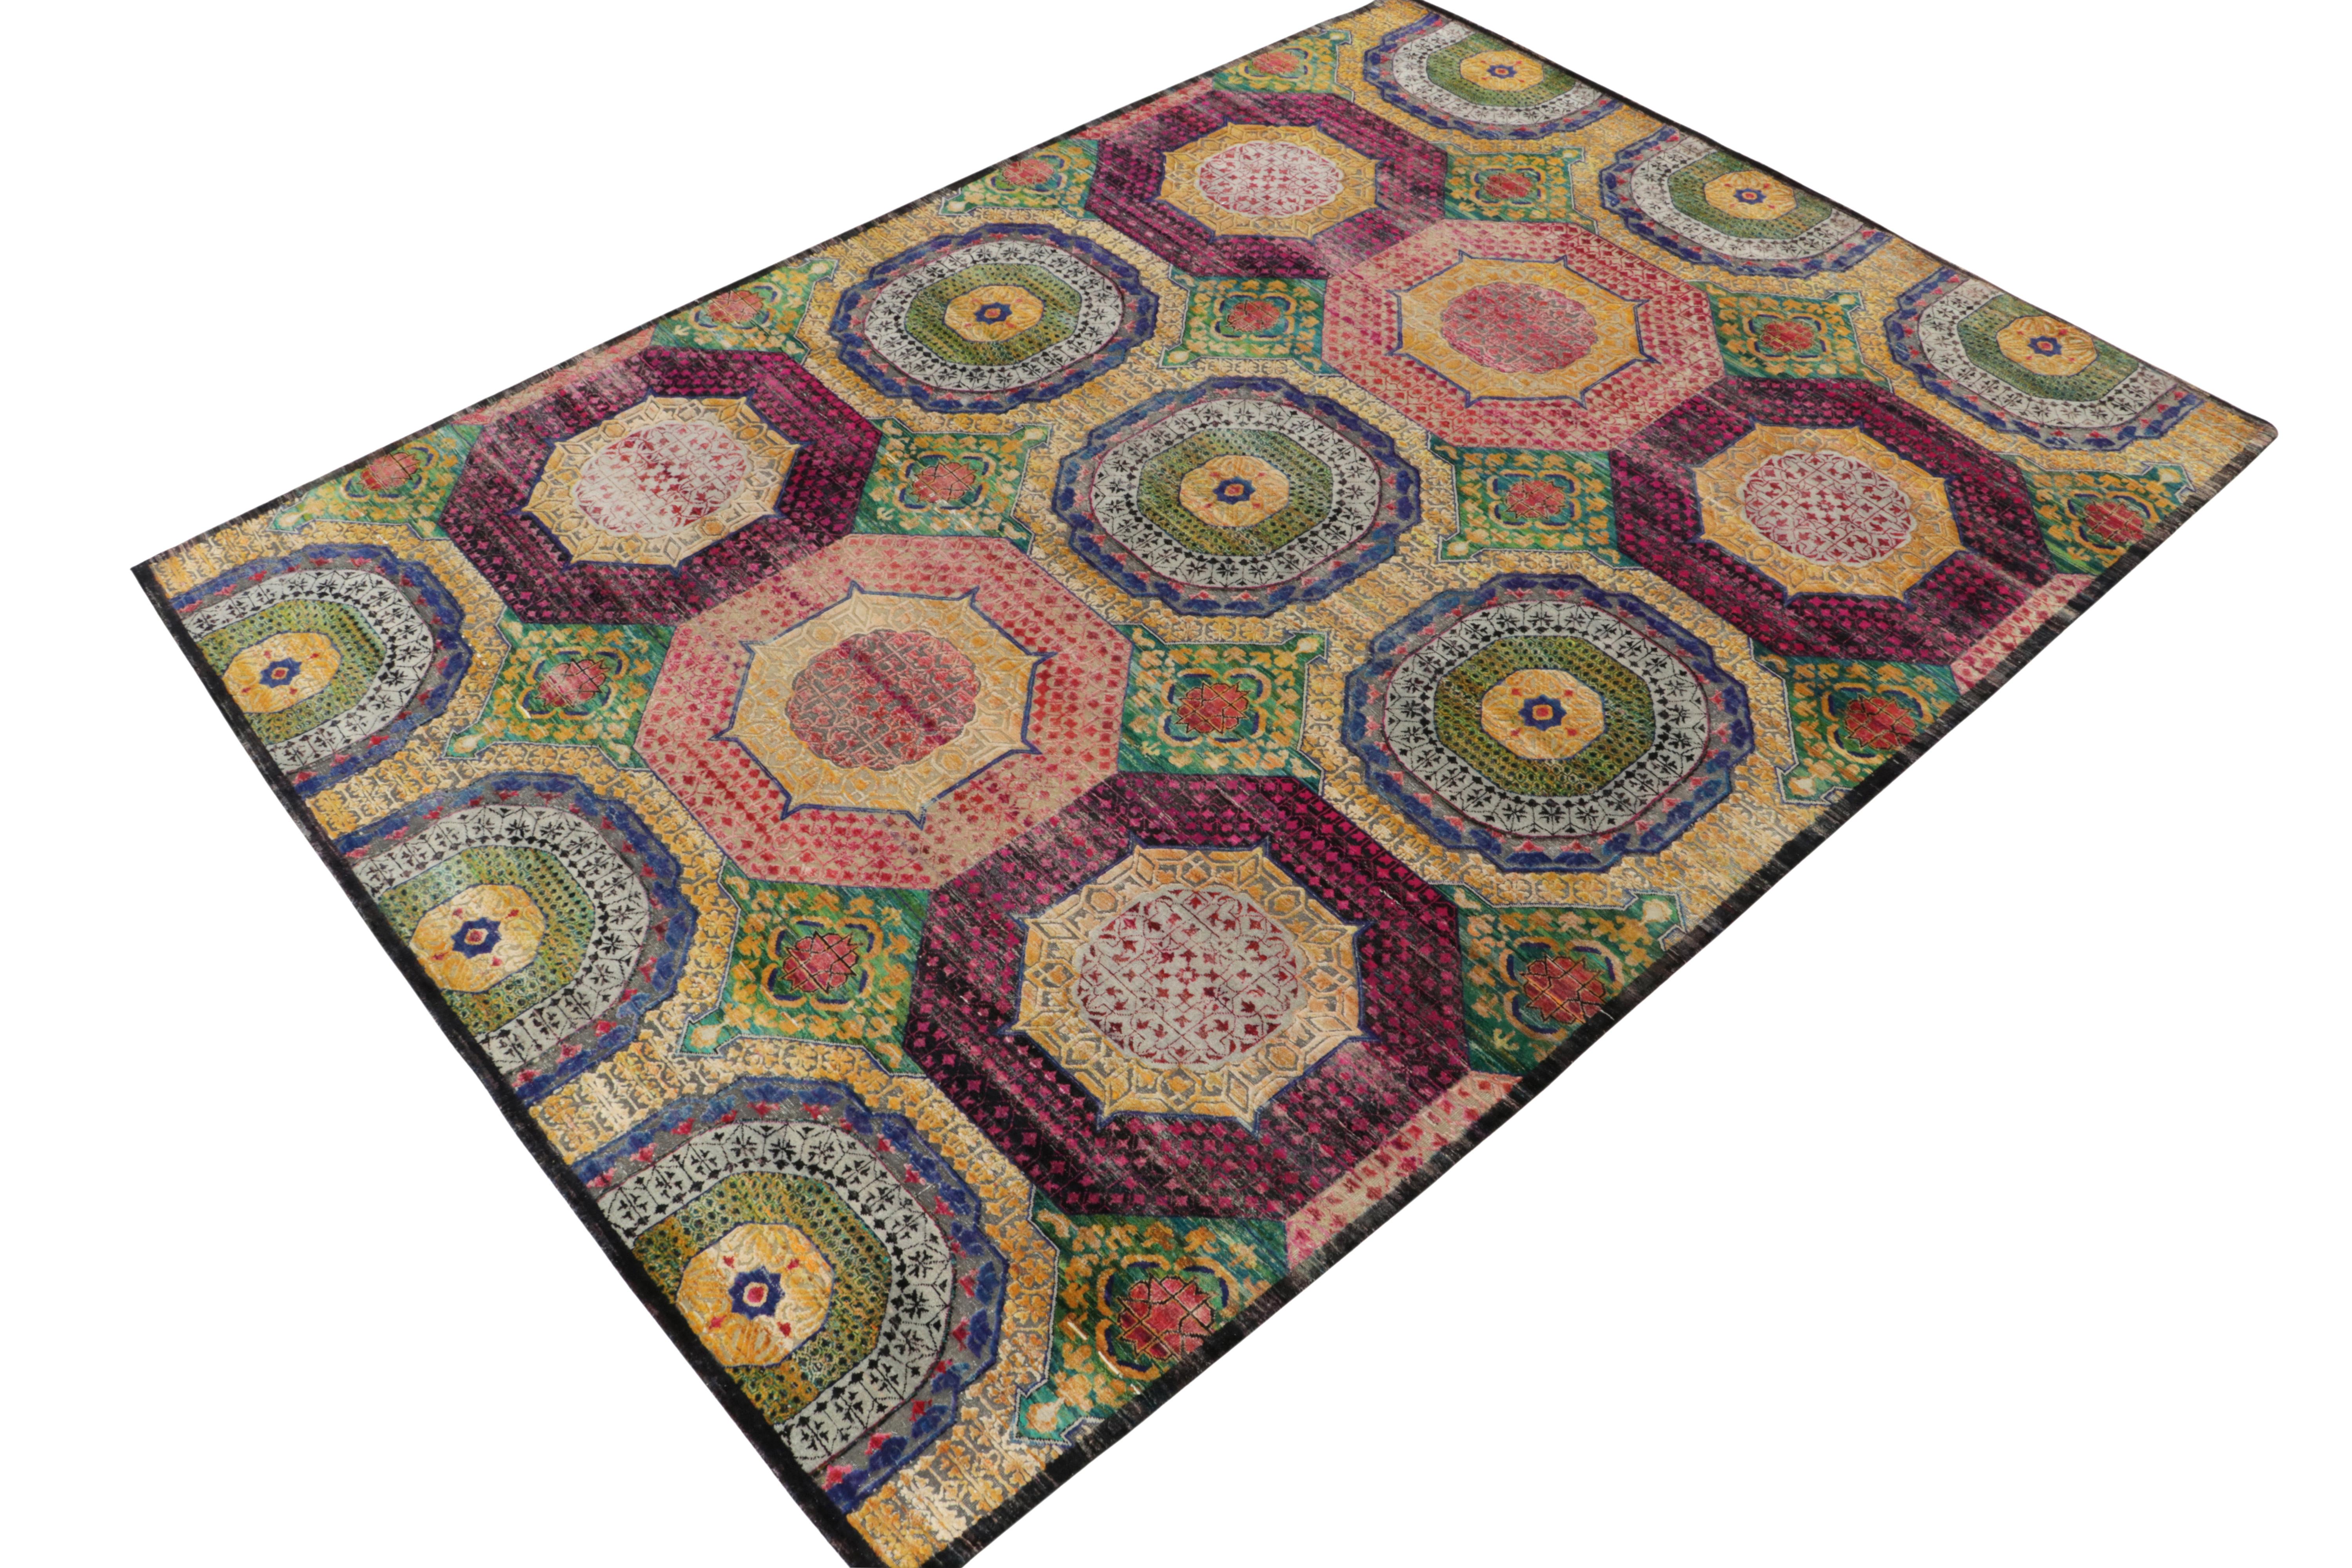 Hand-knotted in fine quality wool & silk, a gorgeous 9x12 rug inspired by 17th century Indian designs.

On the Design: A favorite from our Modern Classics collection, the design depicts an elaborate classic design in purple, blue, gold and green